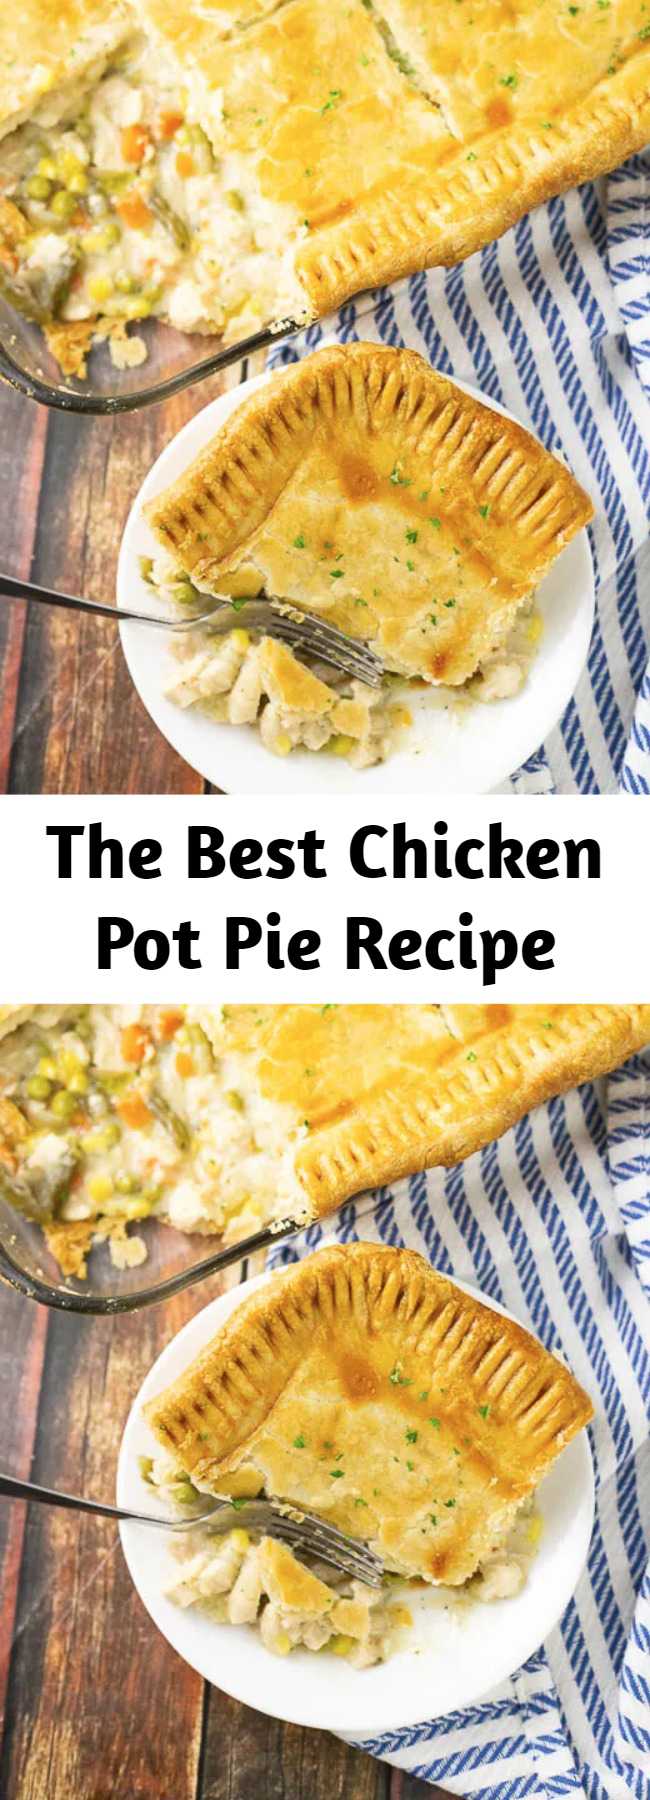 The Best Chicken Pot Pie Recipe - The BEST Chicken Pot Pie you will ever taste with a flaky, buttery crust and chicken and vegetables in a creamy herbed gravy. It is the most well-loved meal in our own house AND on the blog.